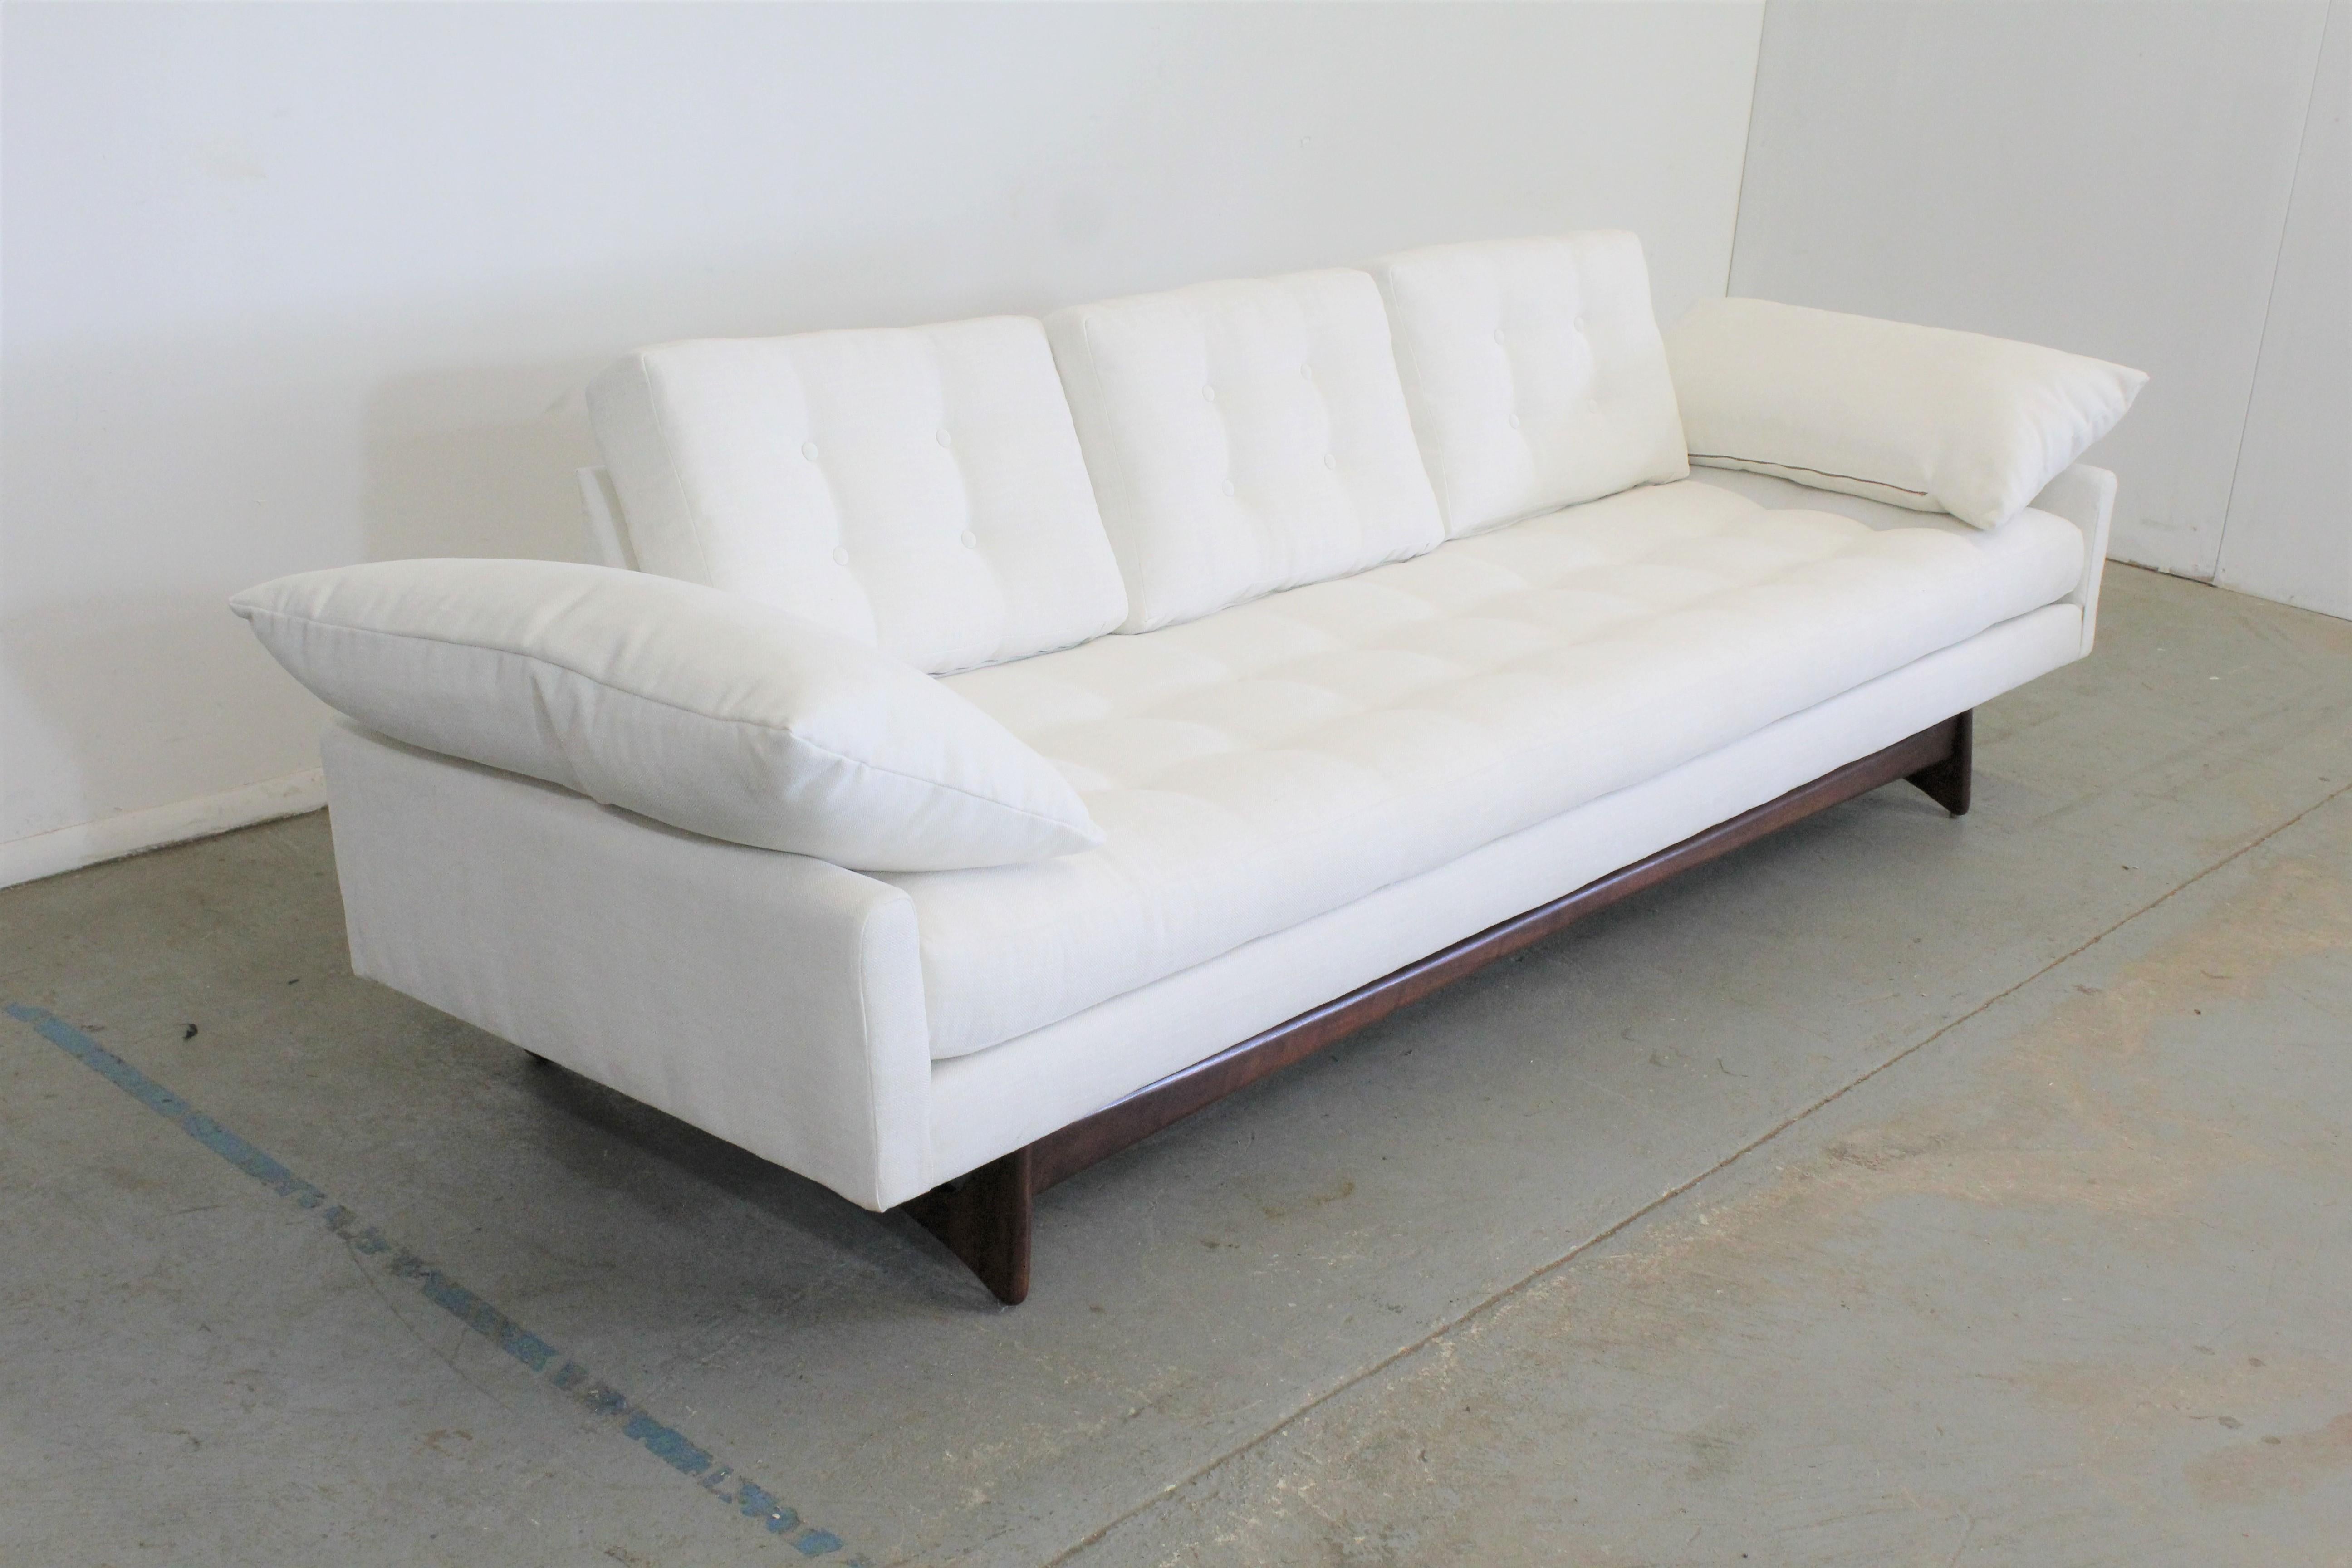 Offered is a beautifully restored 'Gondola' sofa (model 2408) designed by Adrian Pearsall for Craft Associates. Features refinished sculpted wood legs and has been reupholstered with textured designer fabric in 'Pontiac Coconut' by Norbar. In